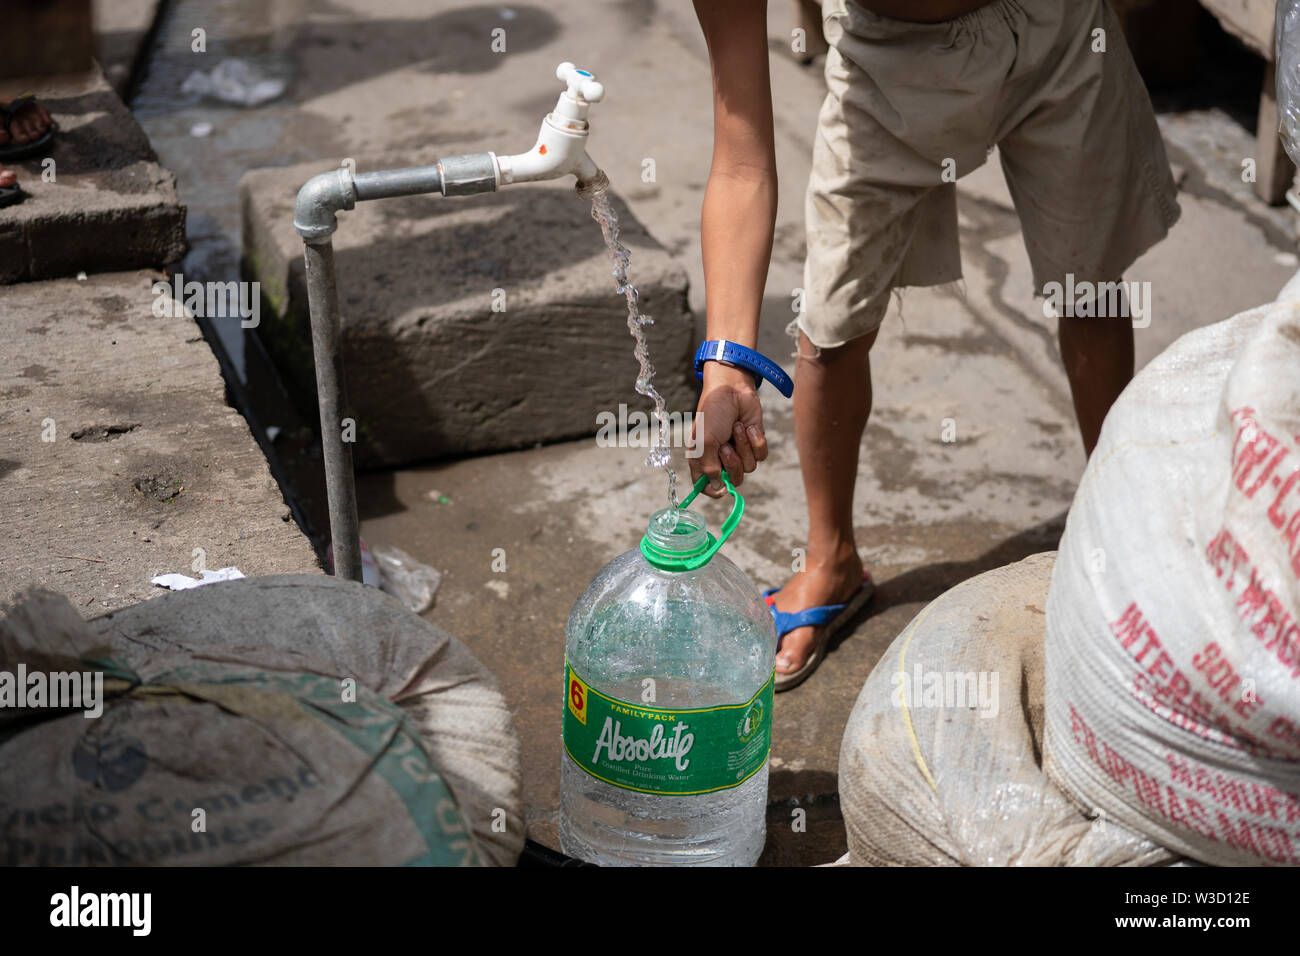 https://c8.alamy.com/comp/W3D12E/a-young-boy-filling-a-plastic-water-container-from-a-standing-water-pipe-within-a-poor-communitycebu-cityphilippines-W3D12E.jpg